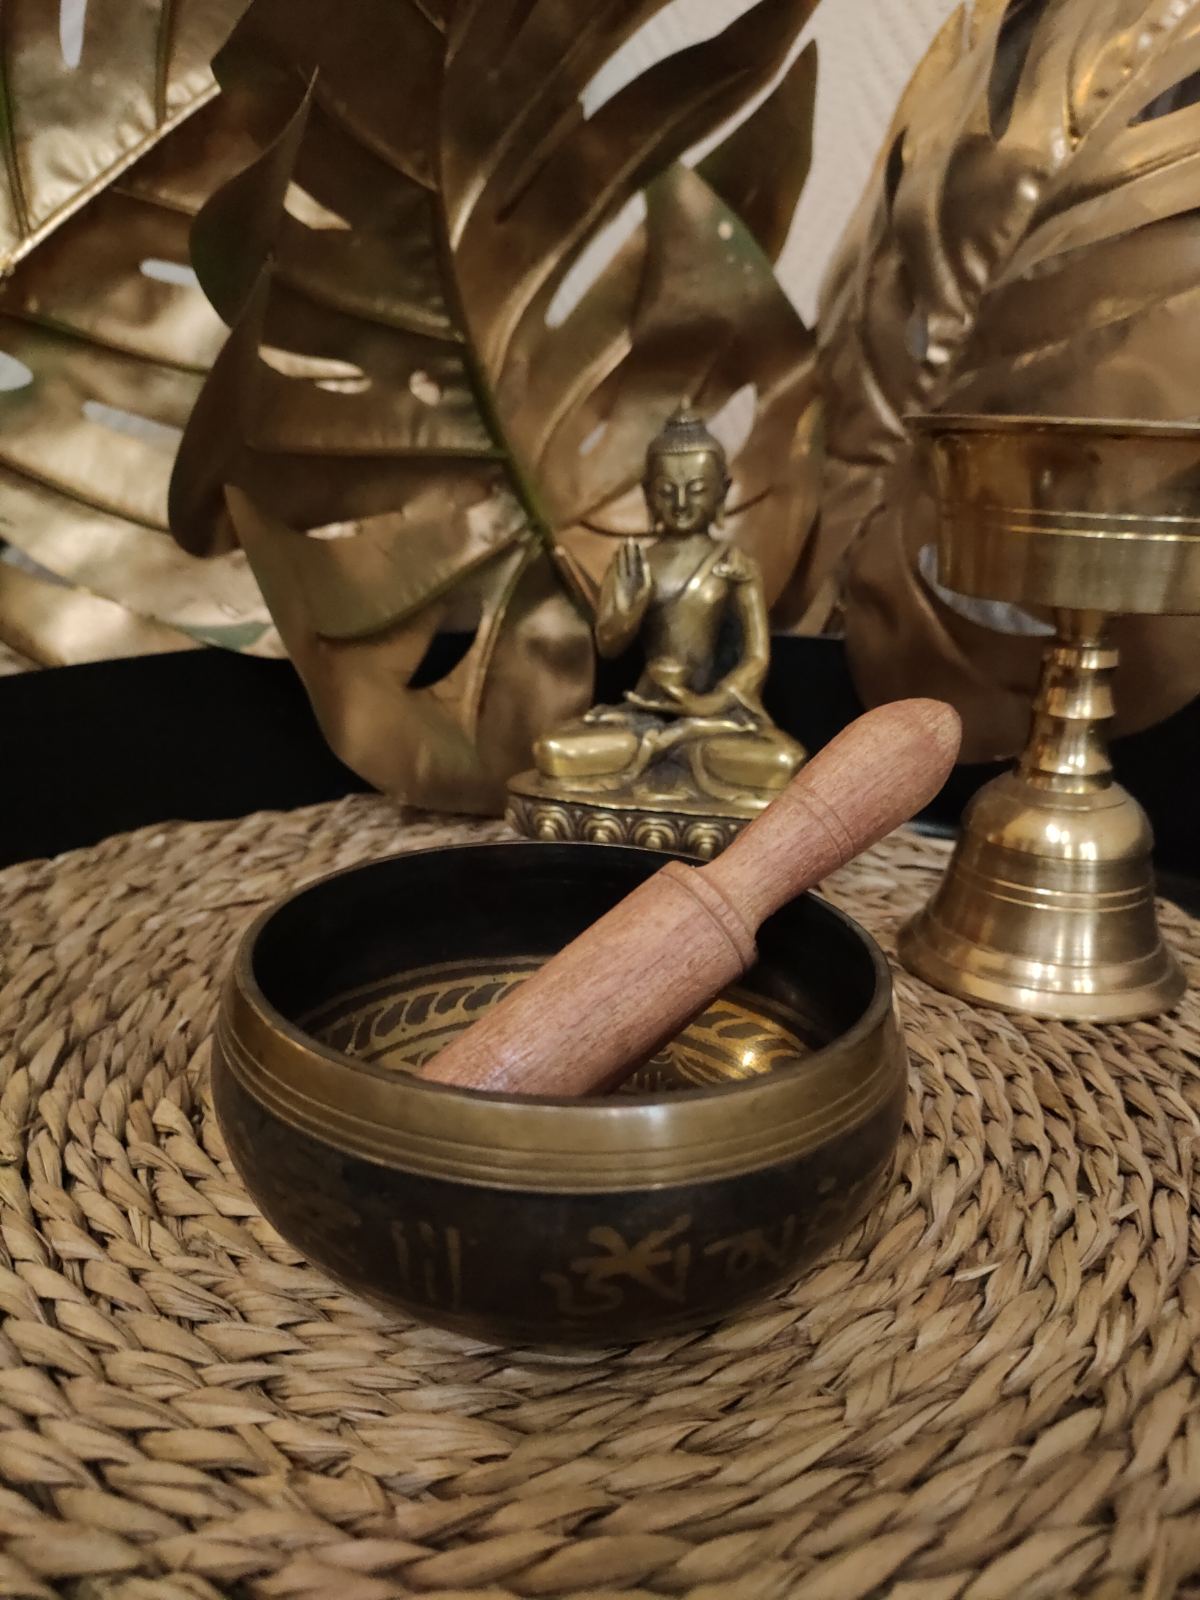 Hand Crafted Singing Bowl With Mantra and Buddha Eye Carving